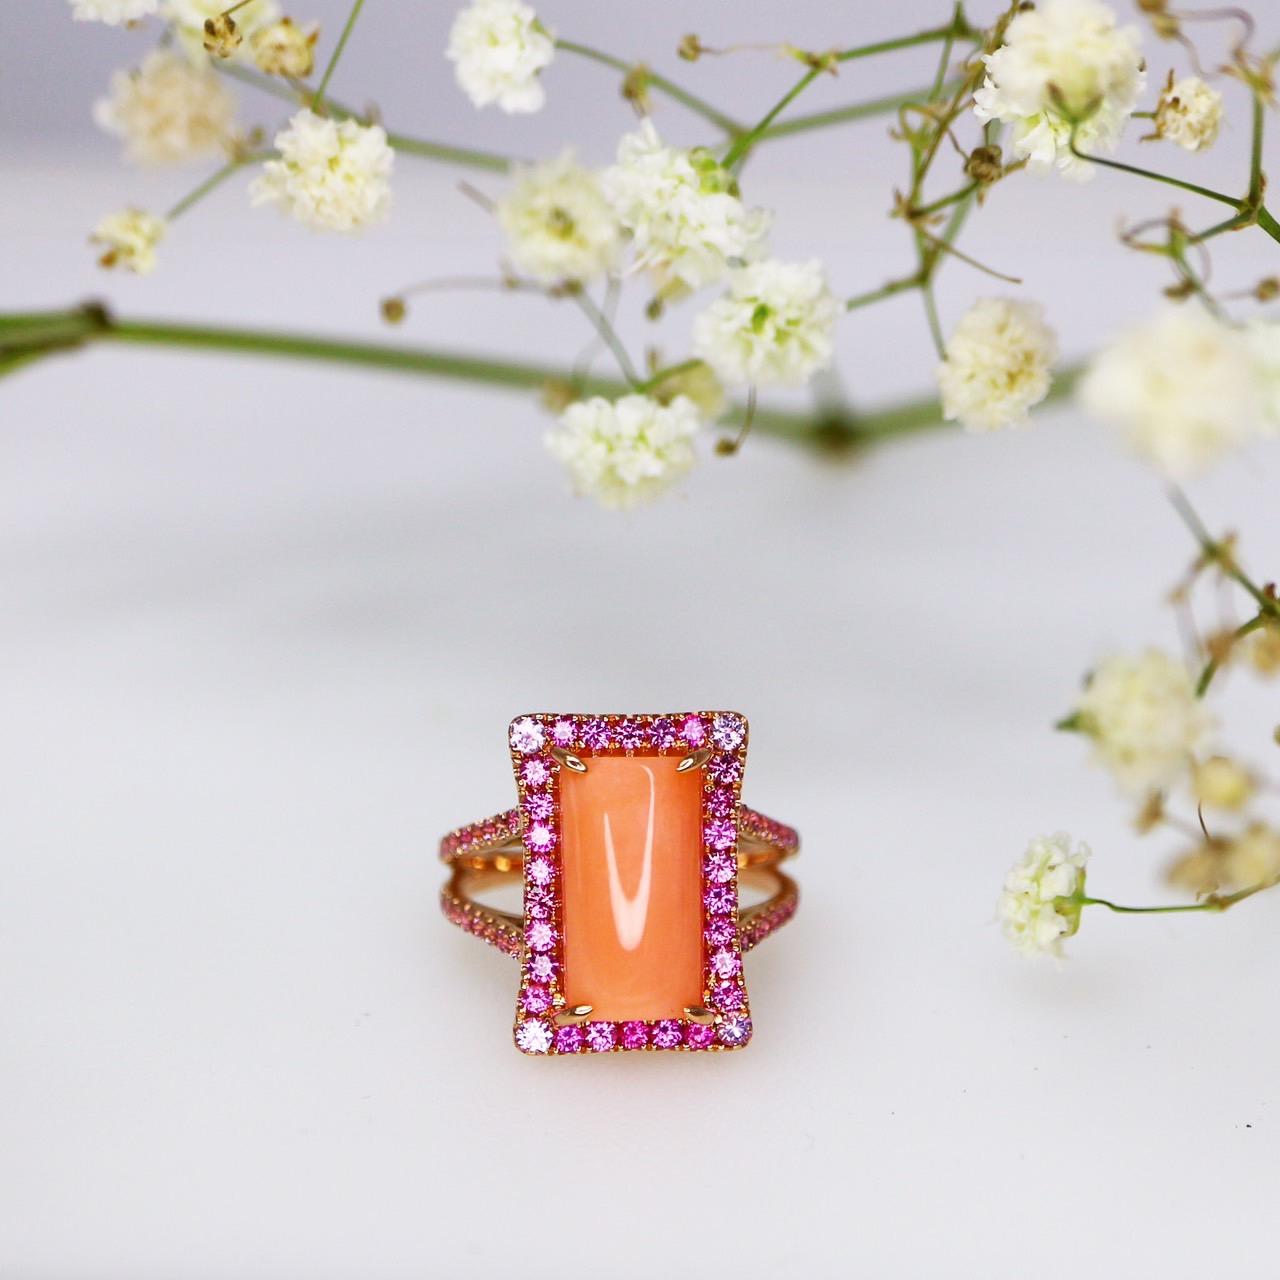 *5.36 Ctw Natural Taiwan Coral & Sapphire Antique Art Deco Style Engagement Ring*

The beautiful natural Taiwan Coral with pink color weighing 4.45 ct as the main stone set on the 14K rose gold band with natural vivid pink color sapphires weighing